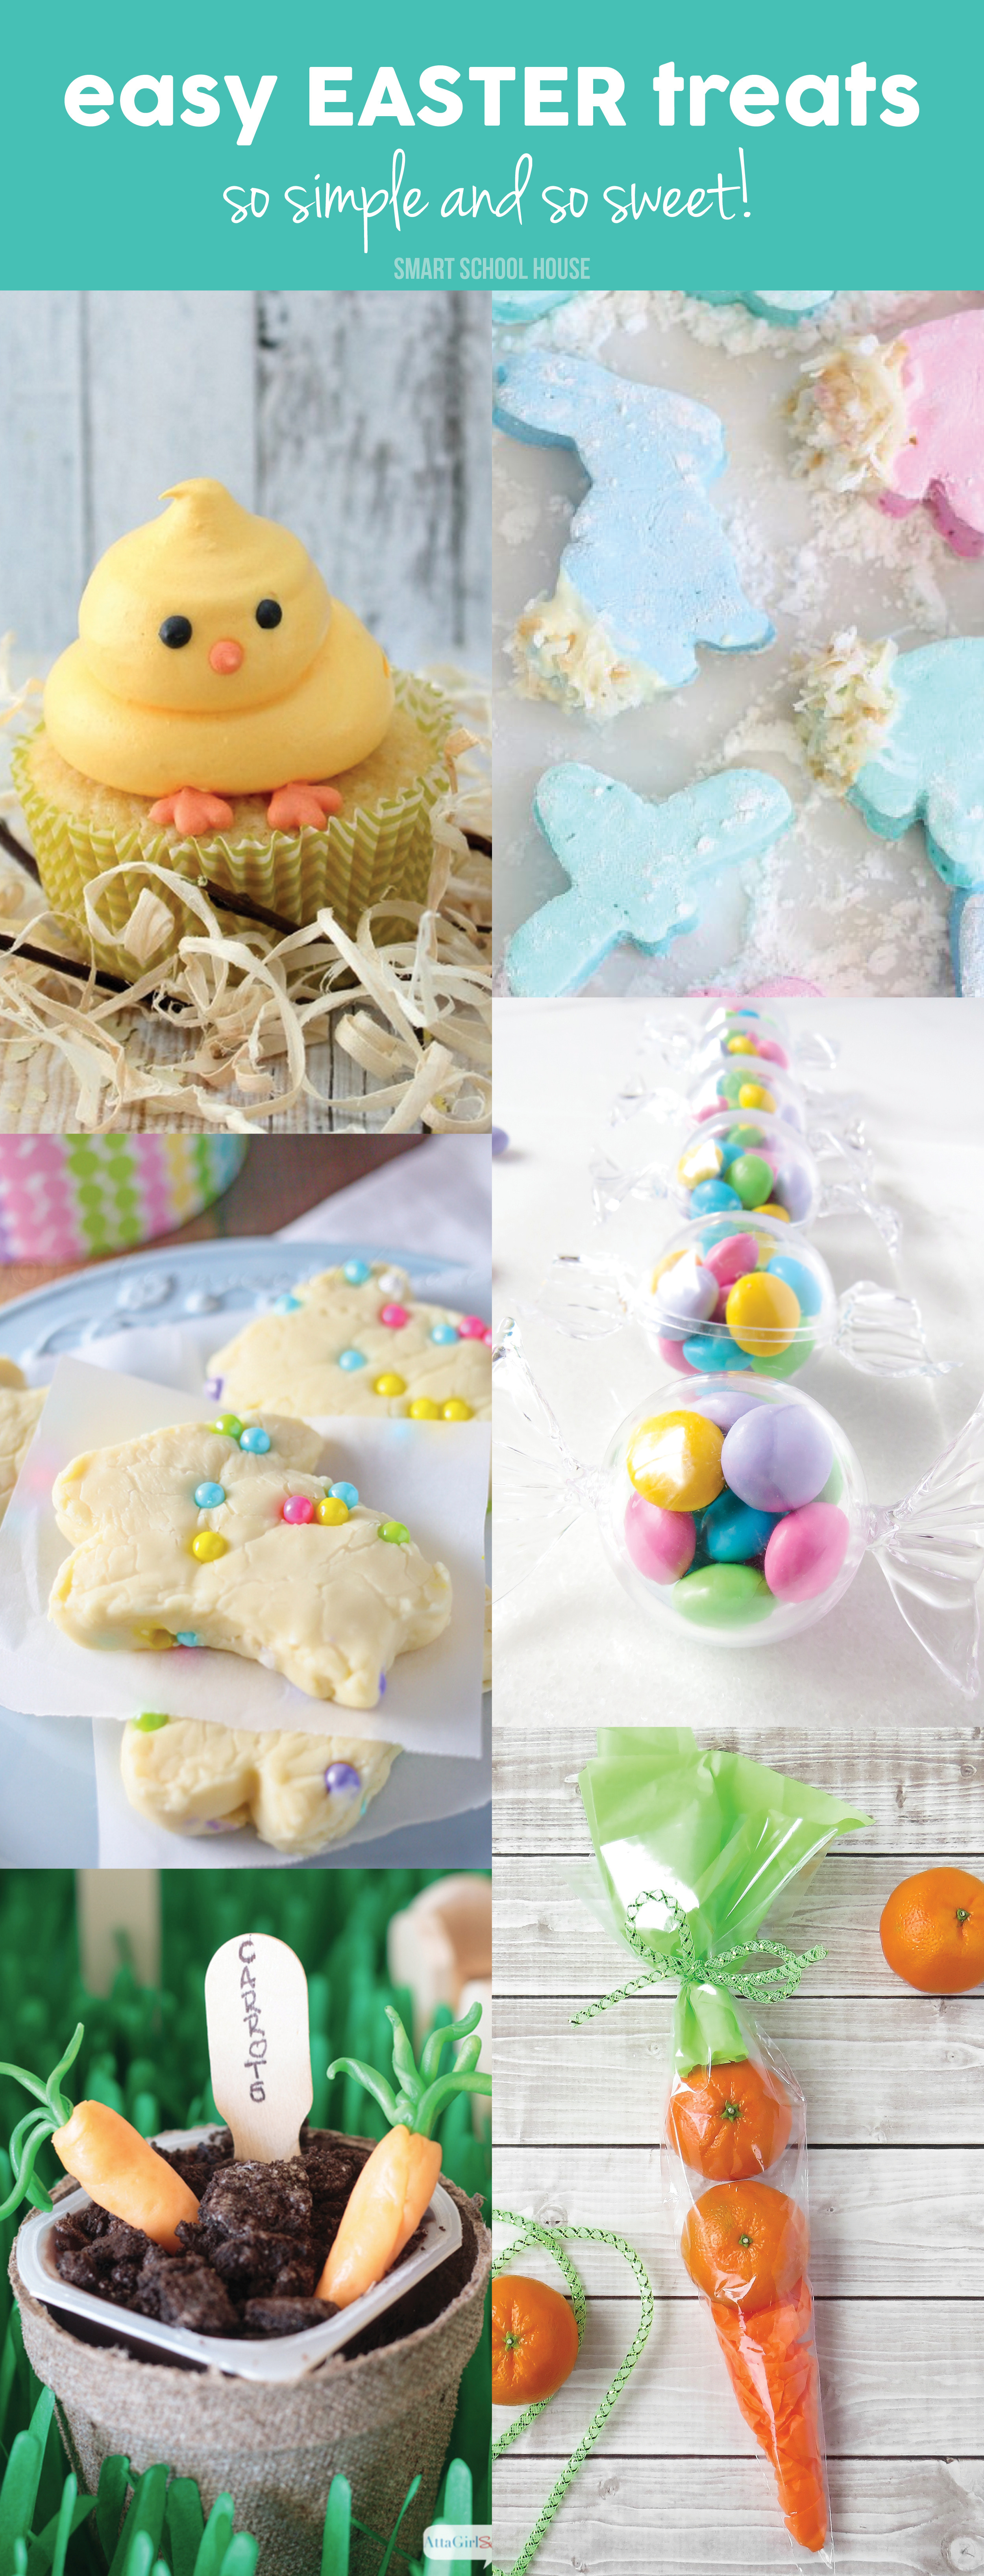 Quick And Easy Easter Desserts
 easy easter treats